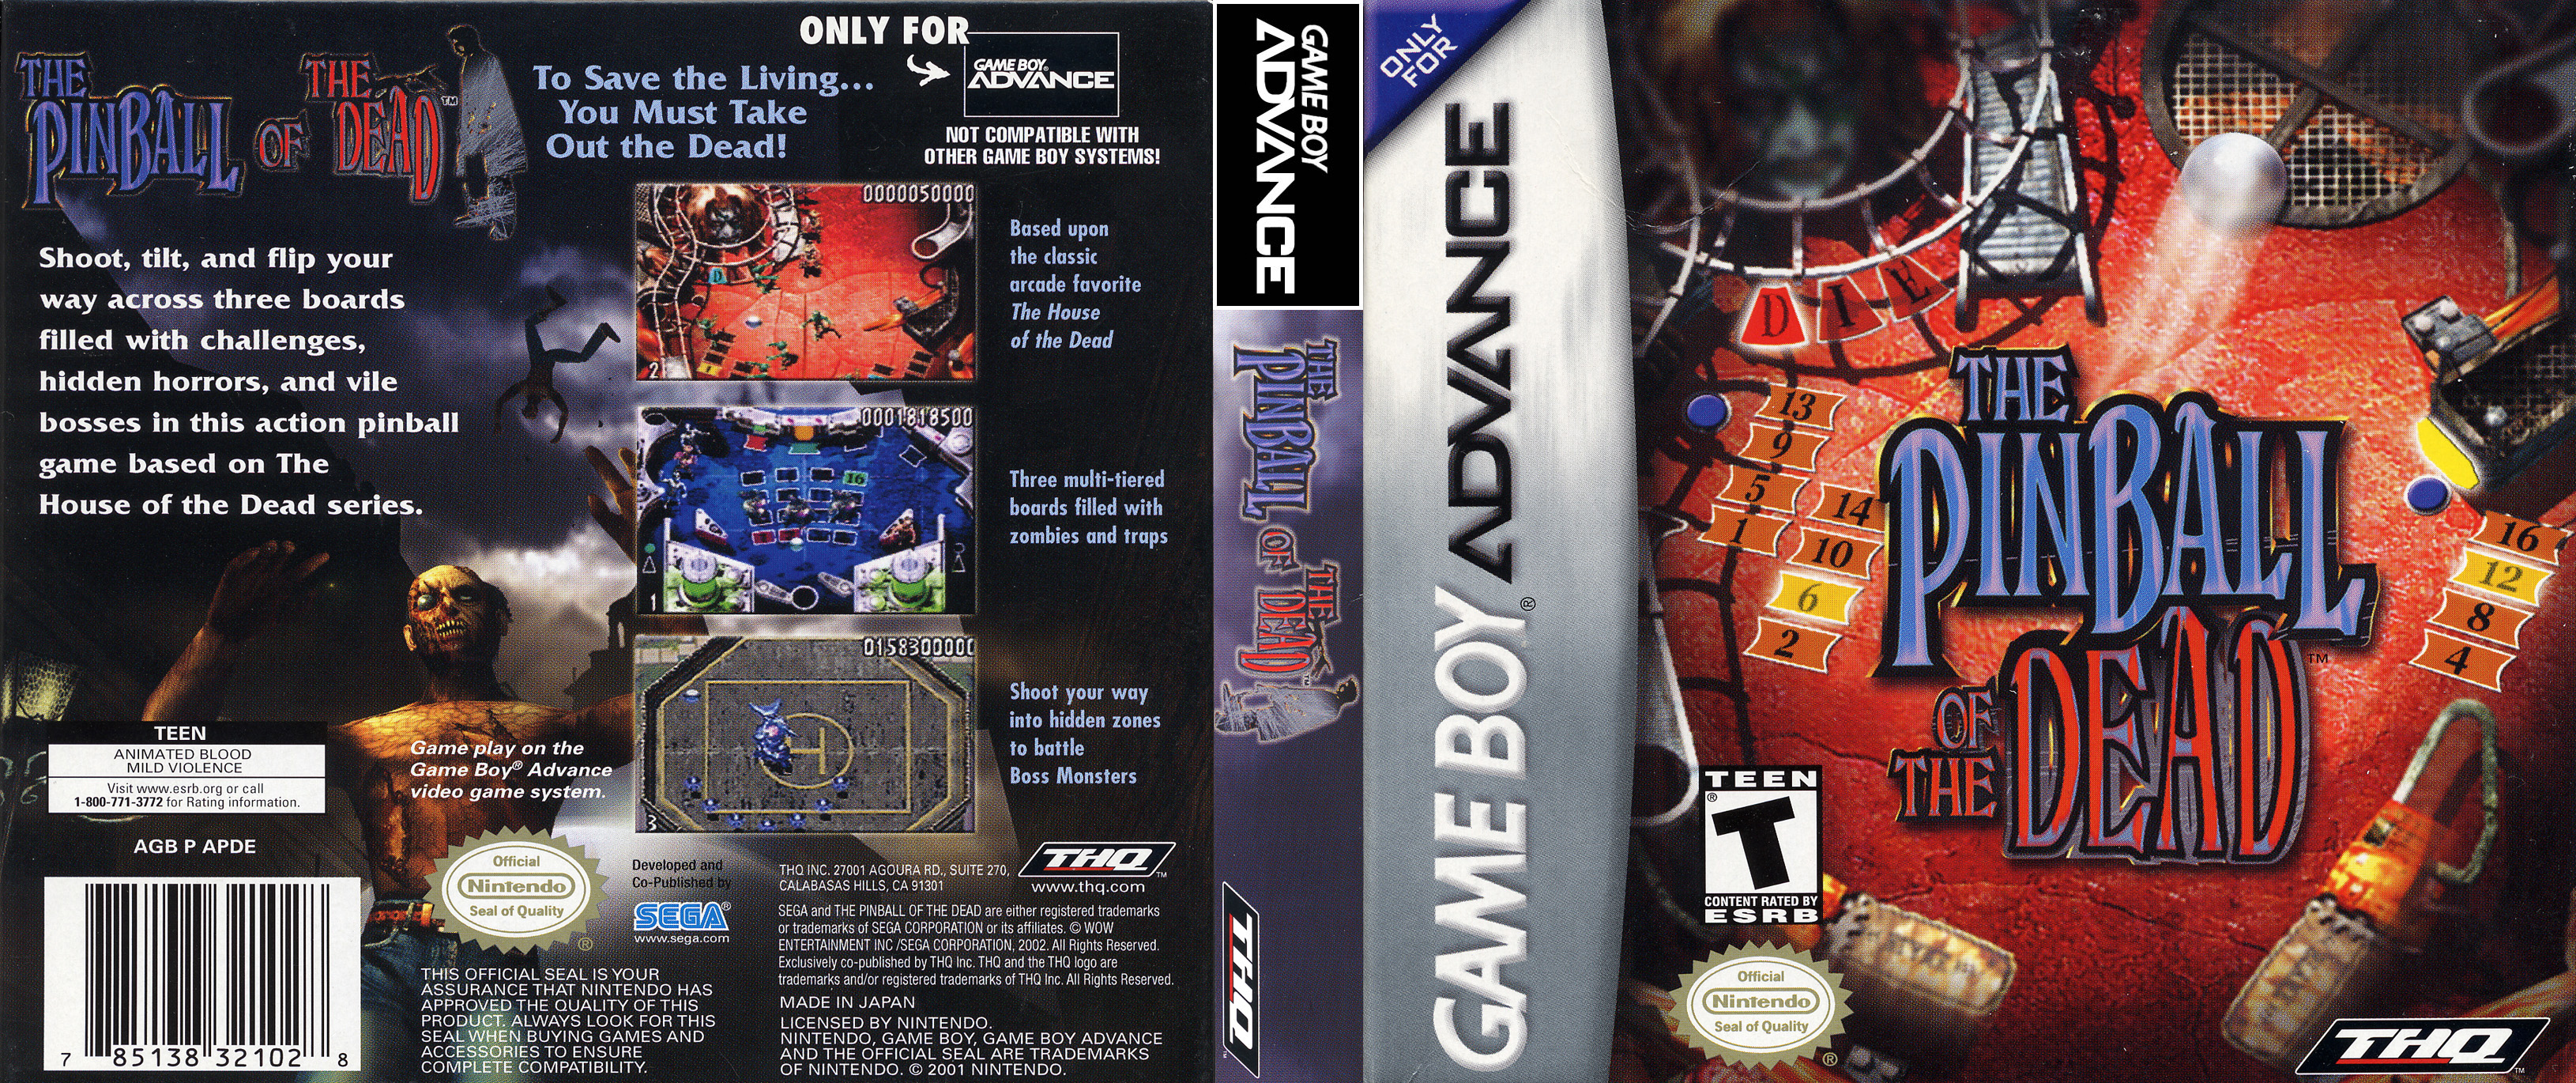 Pinball of the dead | Gameboy Advance Covers | Cover Century 